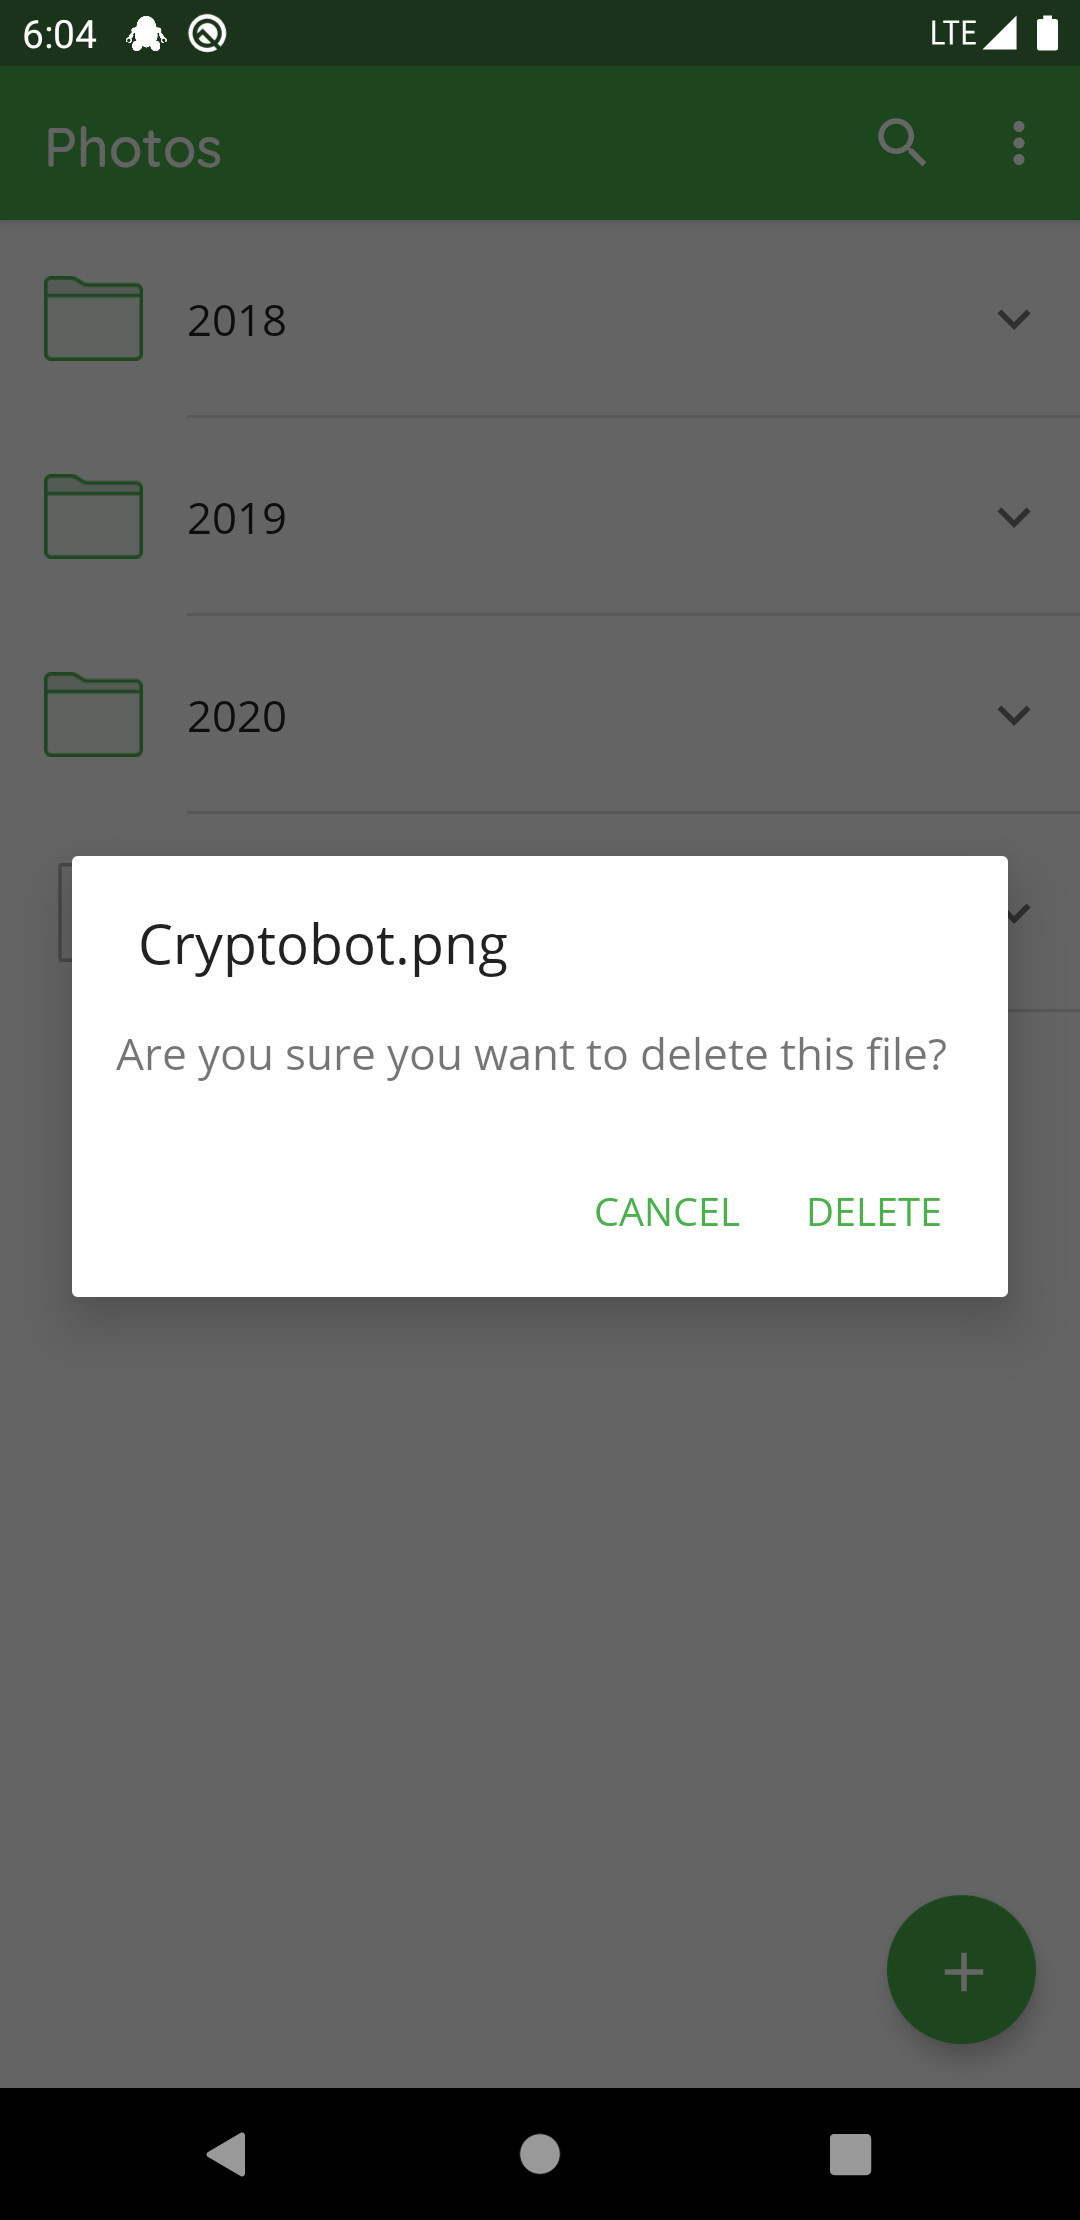 How to delete a file or folder with Android